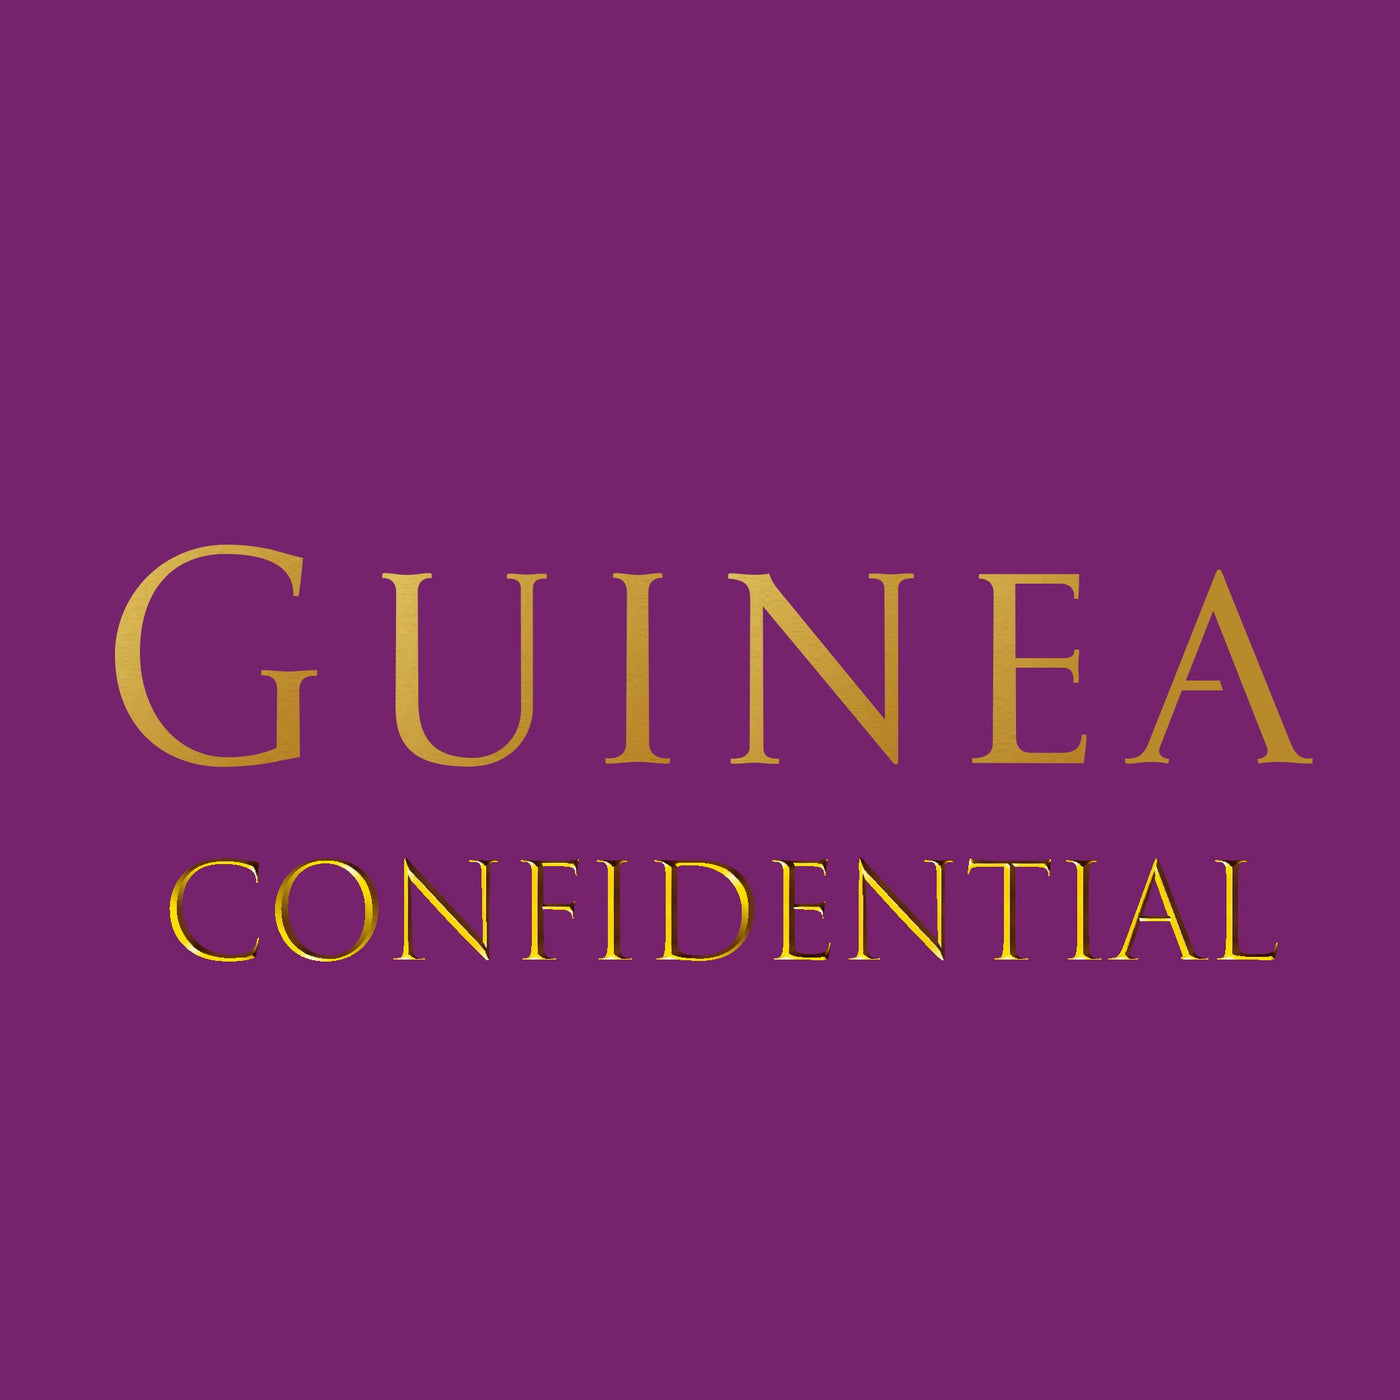 Guinea confidential gold logo on purple background